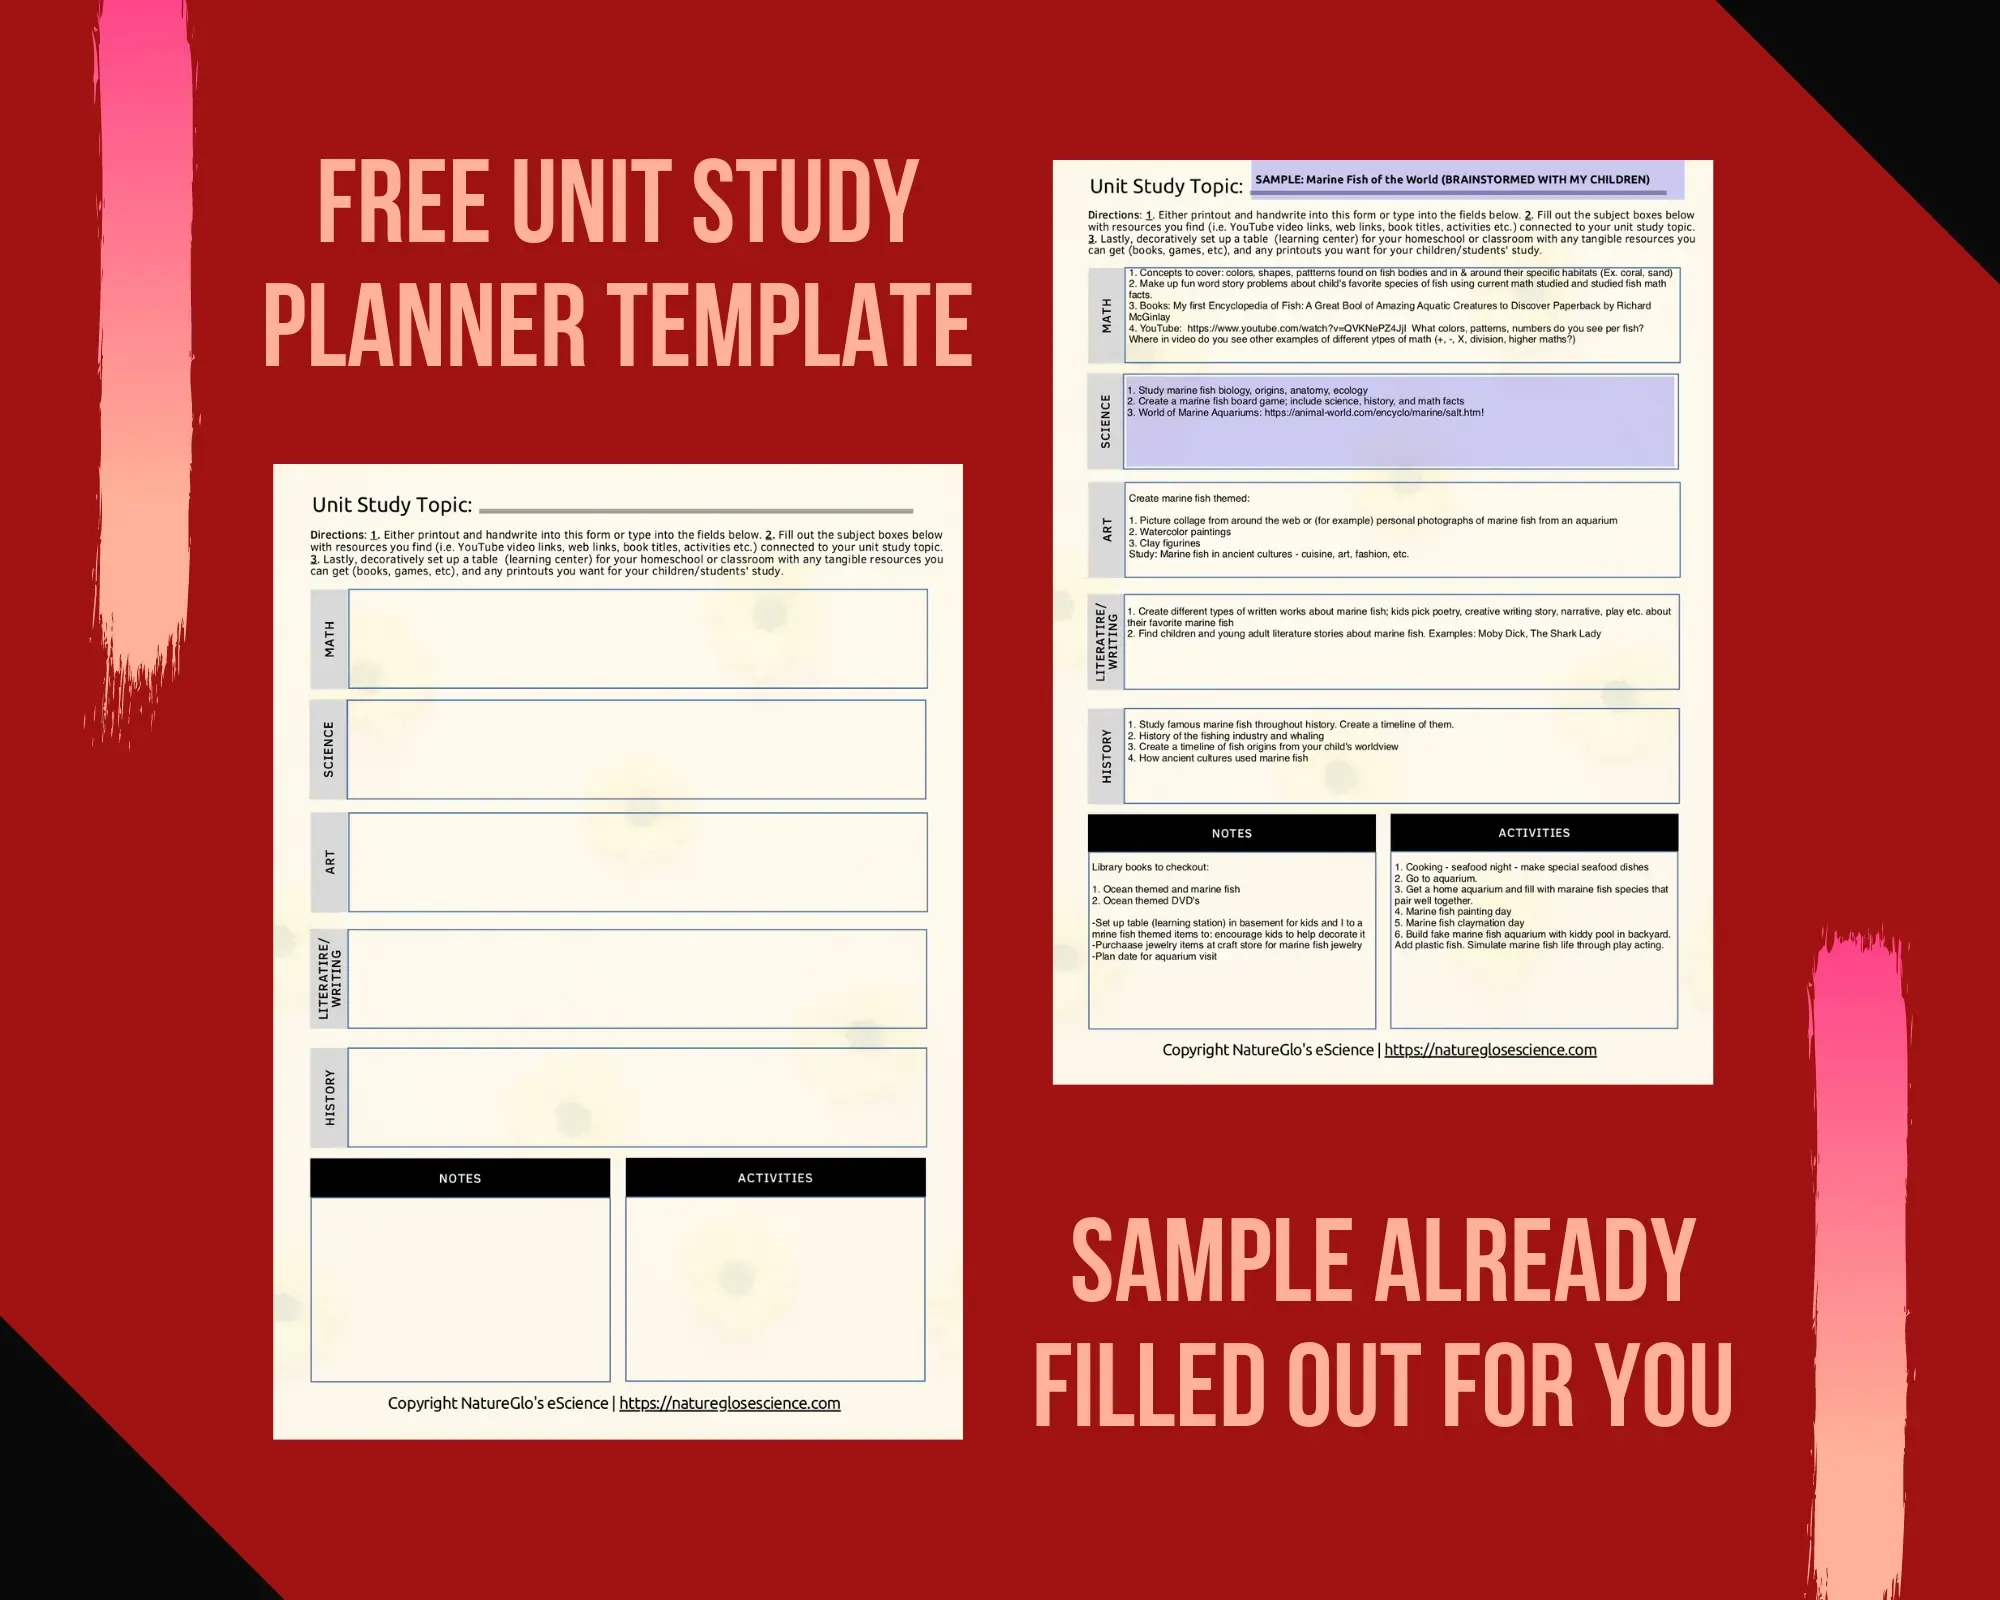 Two fillable unit study planner templates